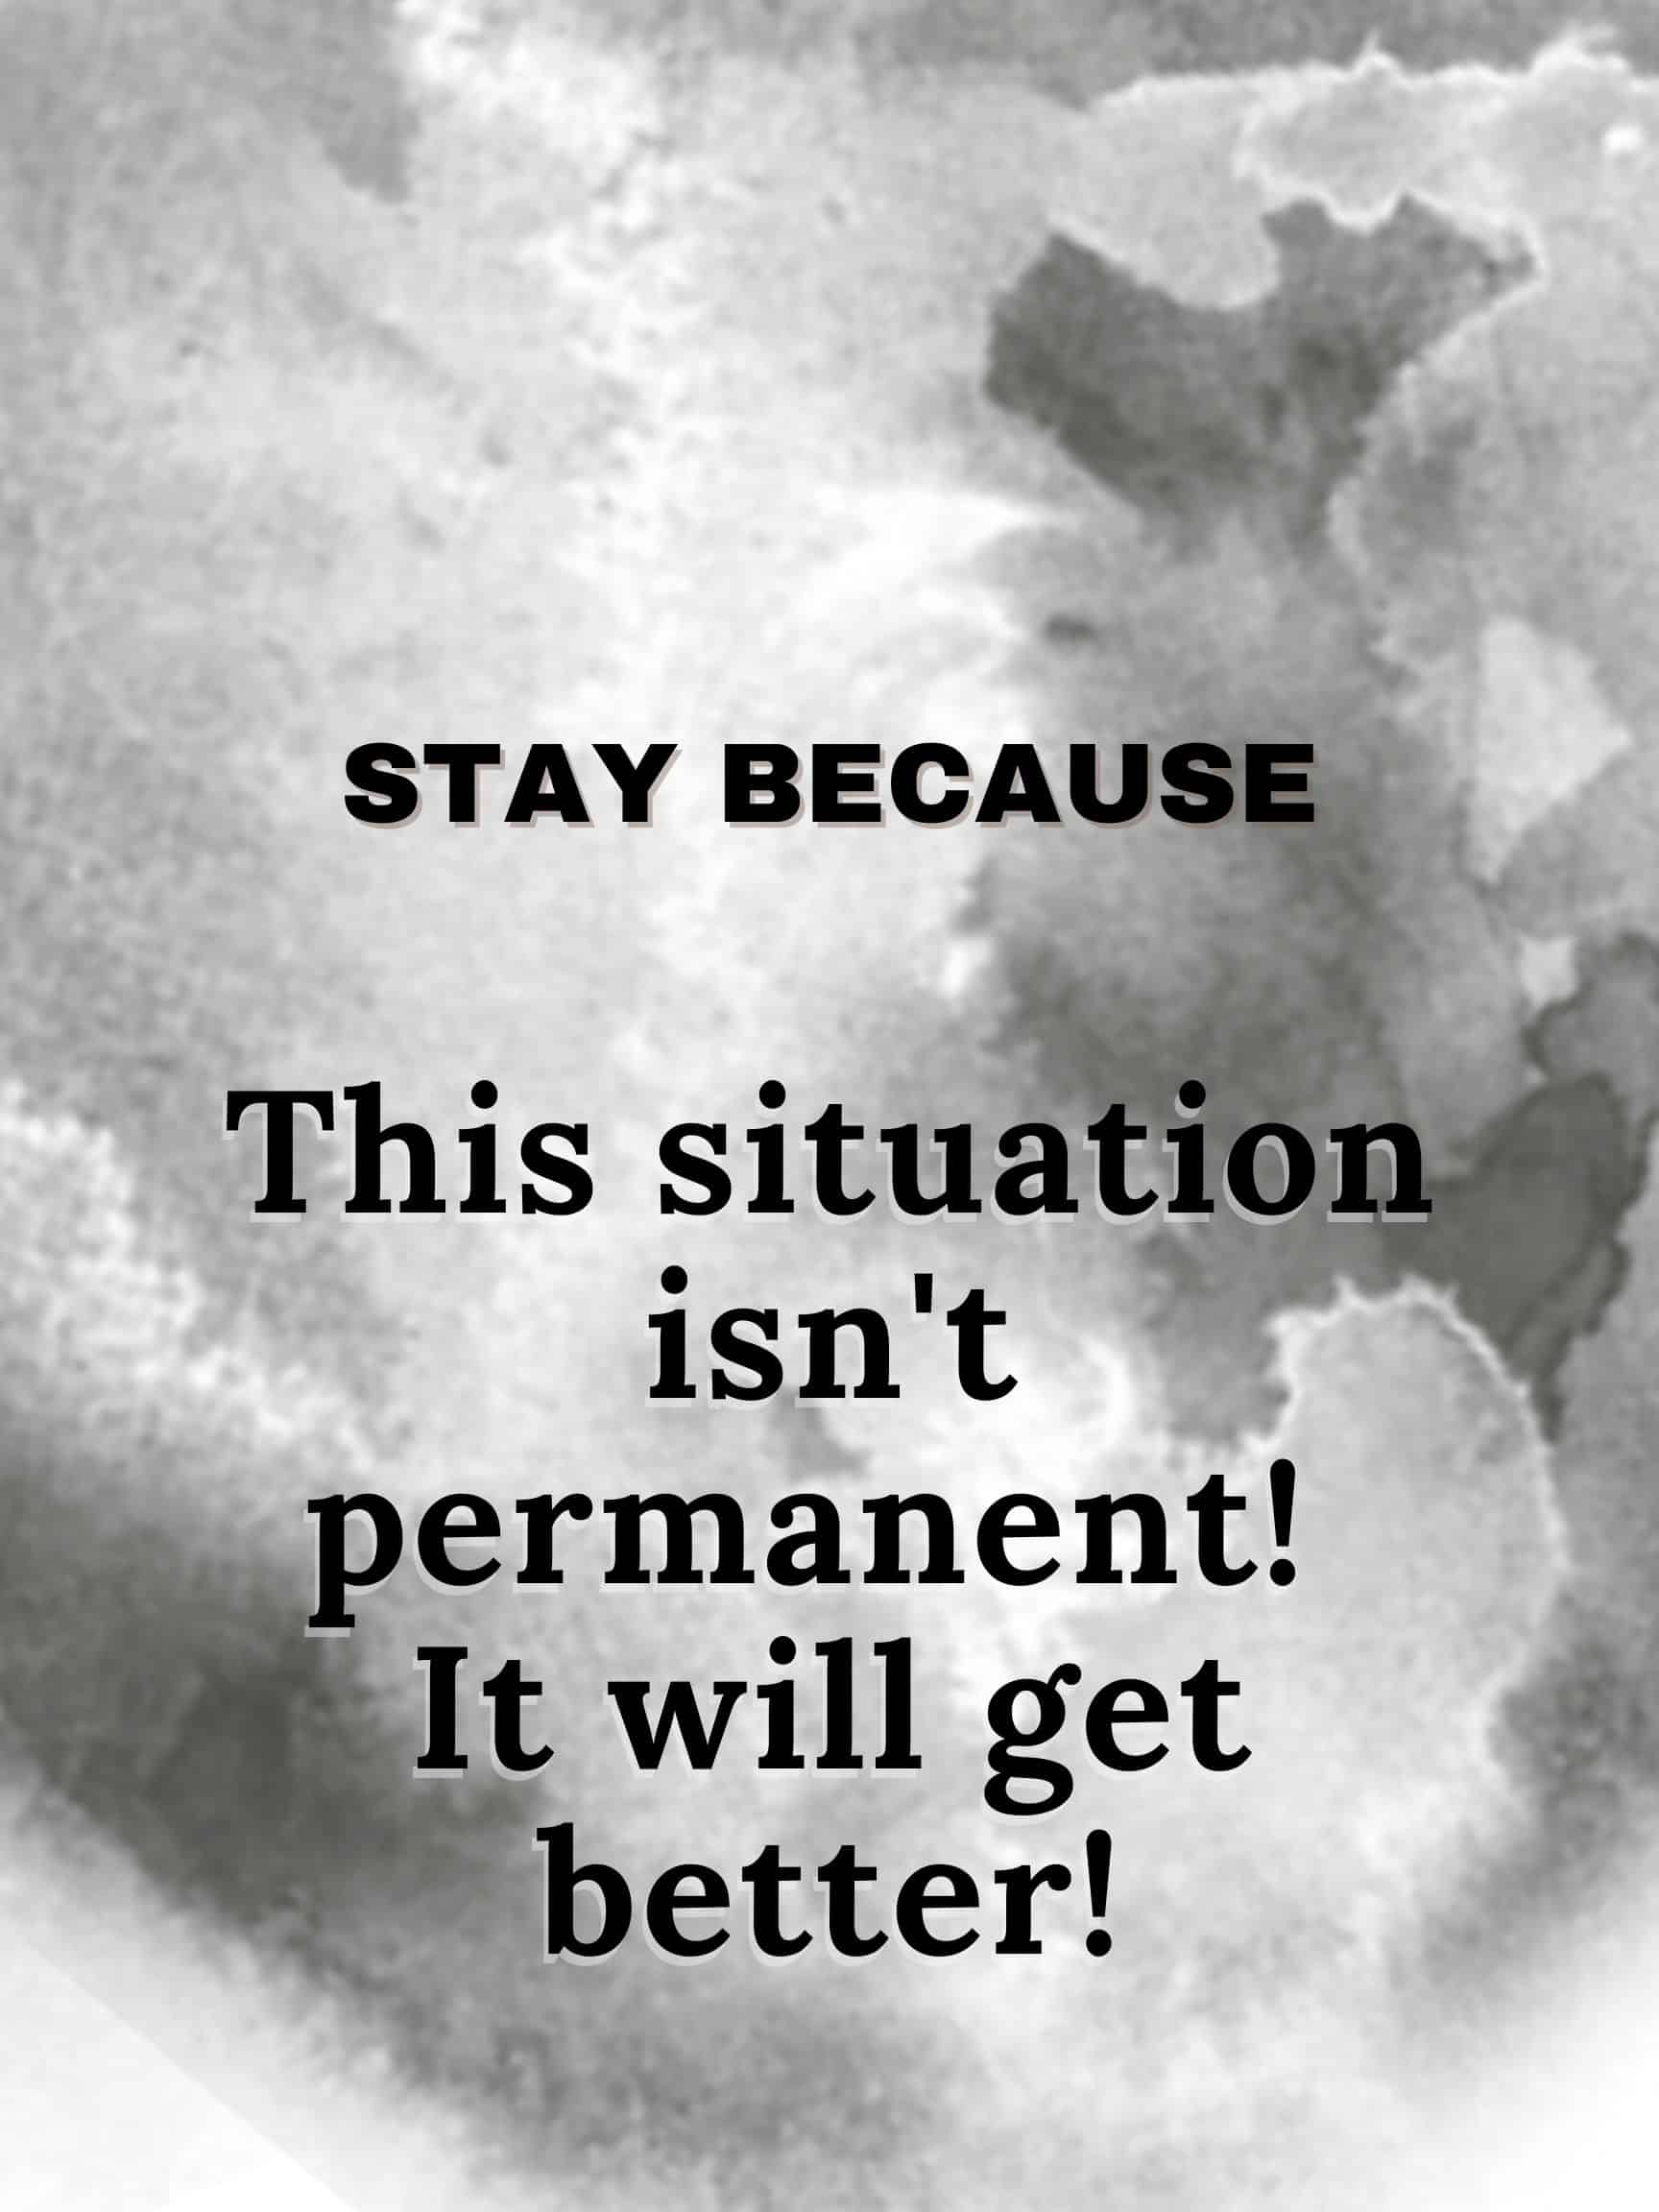 Stay because this situation isn't permanent. It will get better! #StayBecause